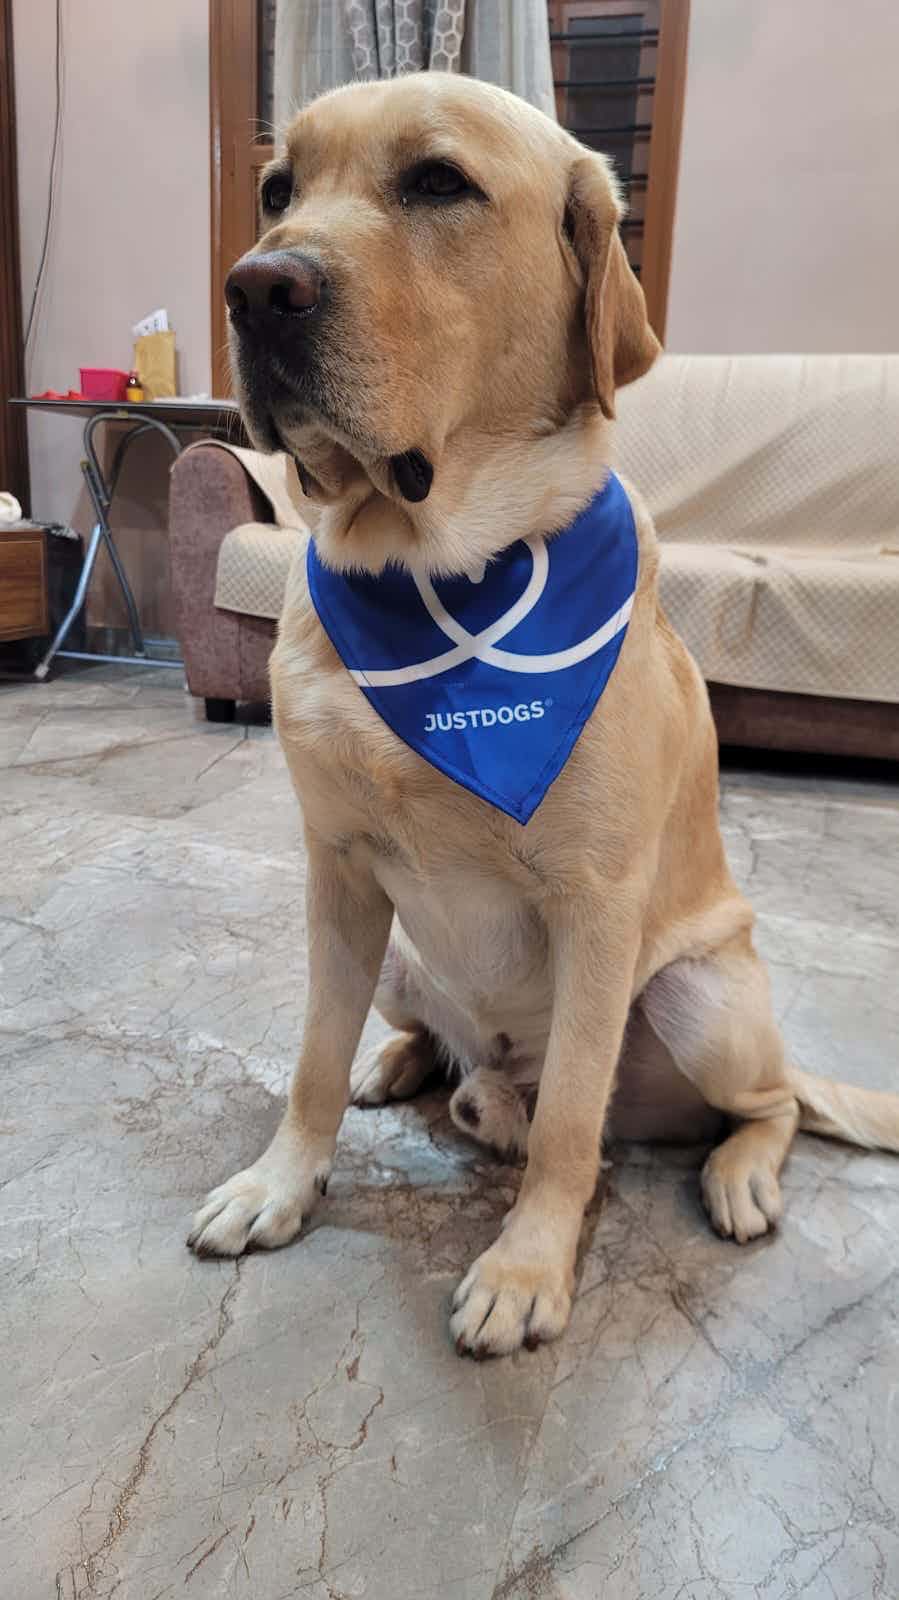 Hello, I'm searching for a mating partner for my   labrador Retriever "Enzo" (M, 2.5 yrs old), extremely loving and obedient certified good boy, pure breed without papers. If you have a female  Labrador retriever in Bangalore, reach out to me on whatsapp on +919900329991